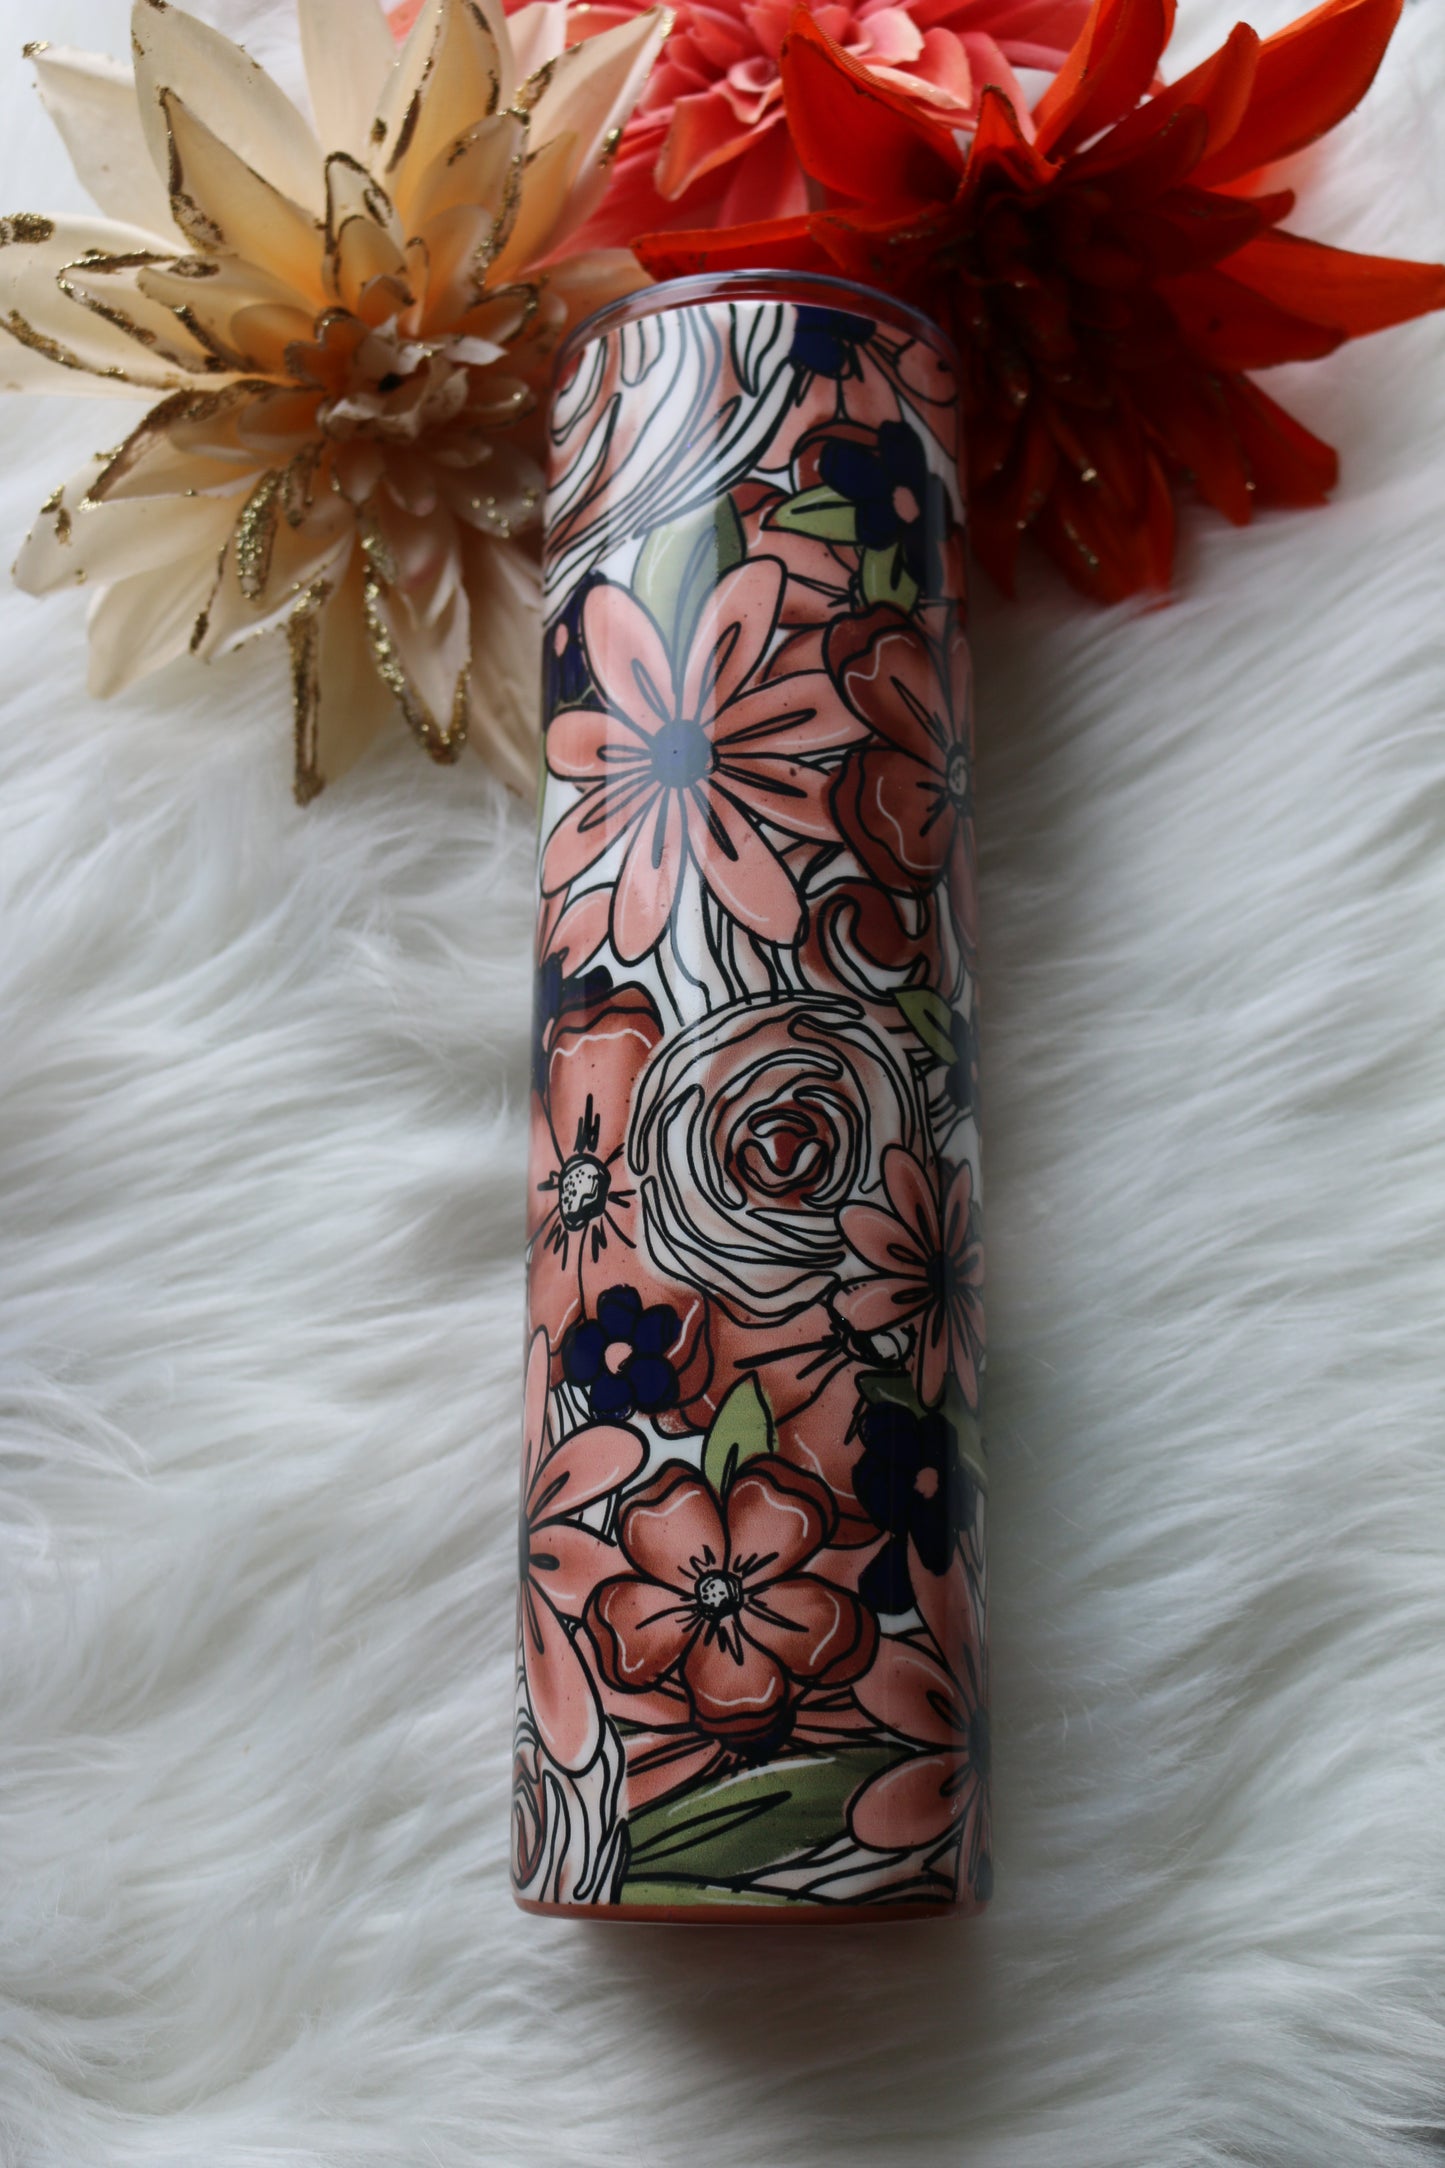 40 oz Natural colored Floral Stainless Steal Tumbler